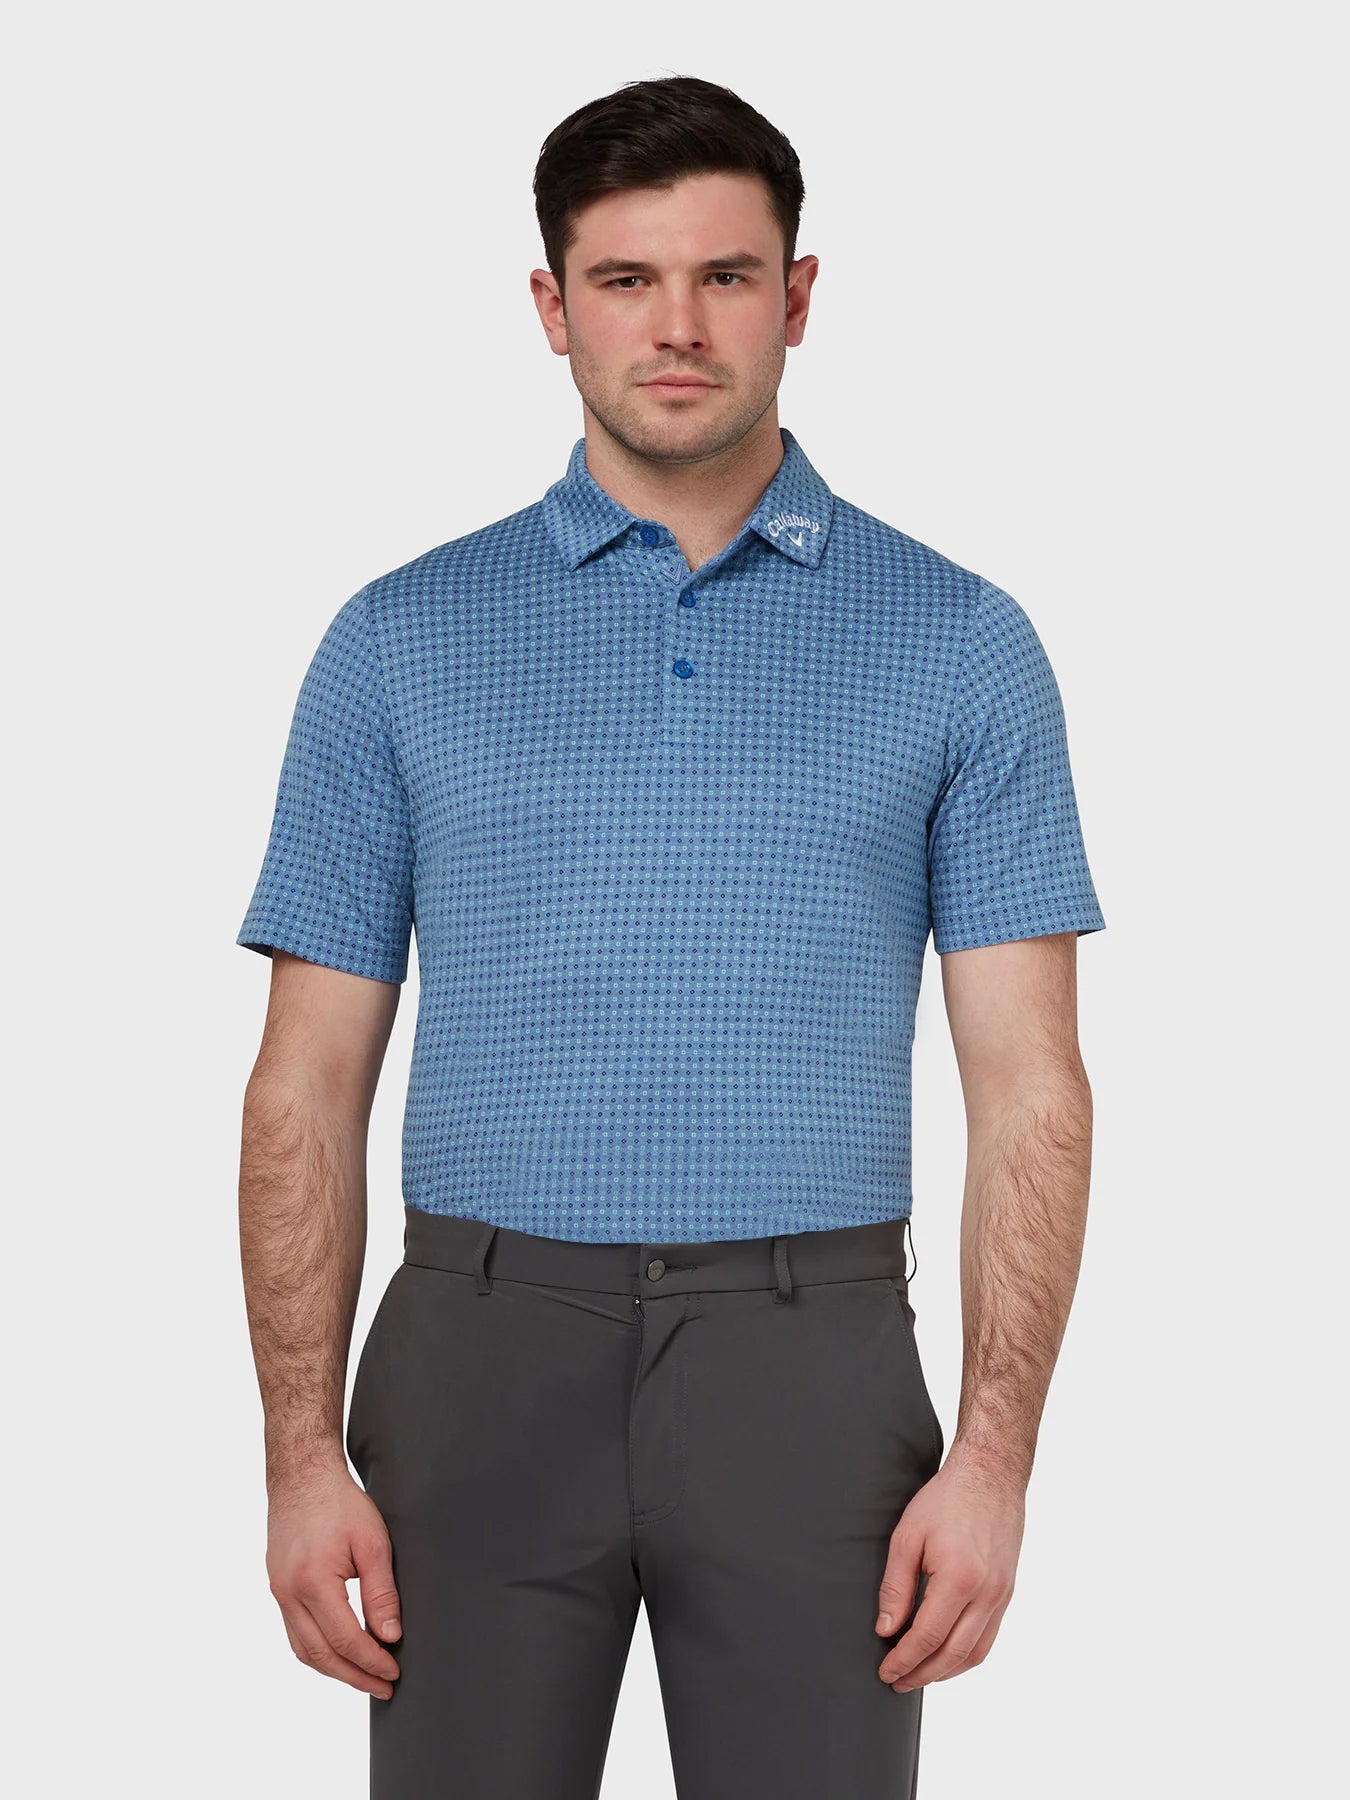 View Soft Touch Micro Print Polo In Magnetic Blue Heather Magnetic Blue Heather XXL information